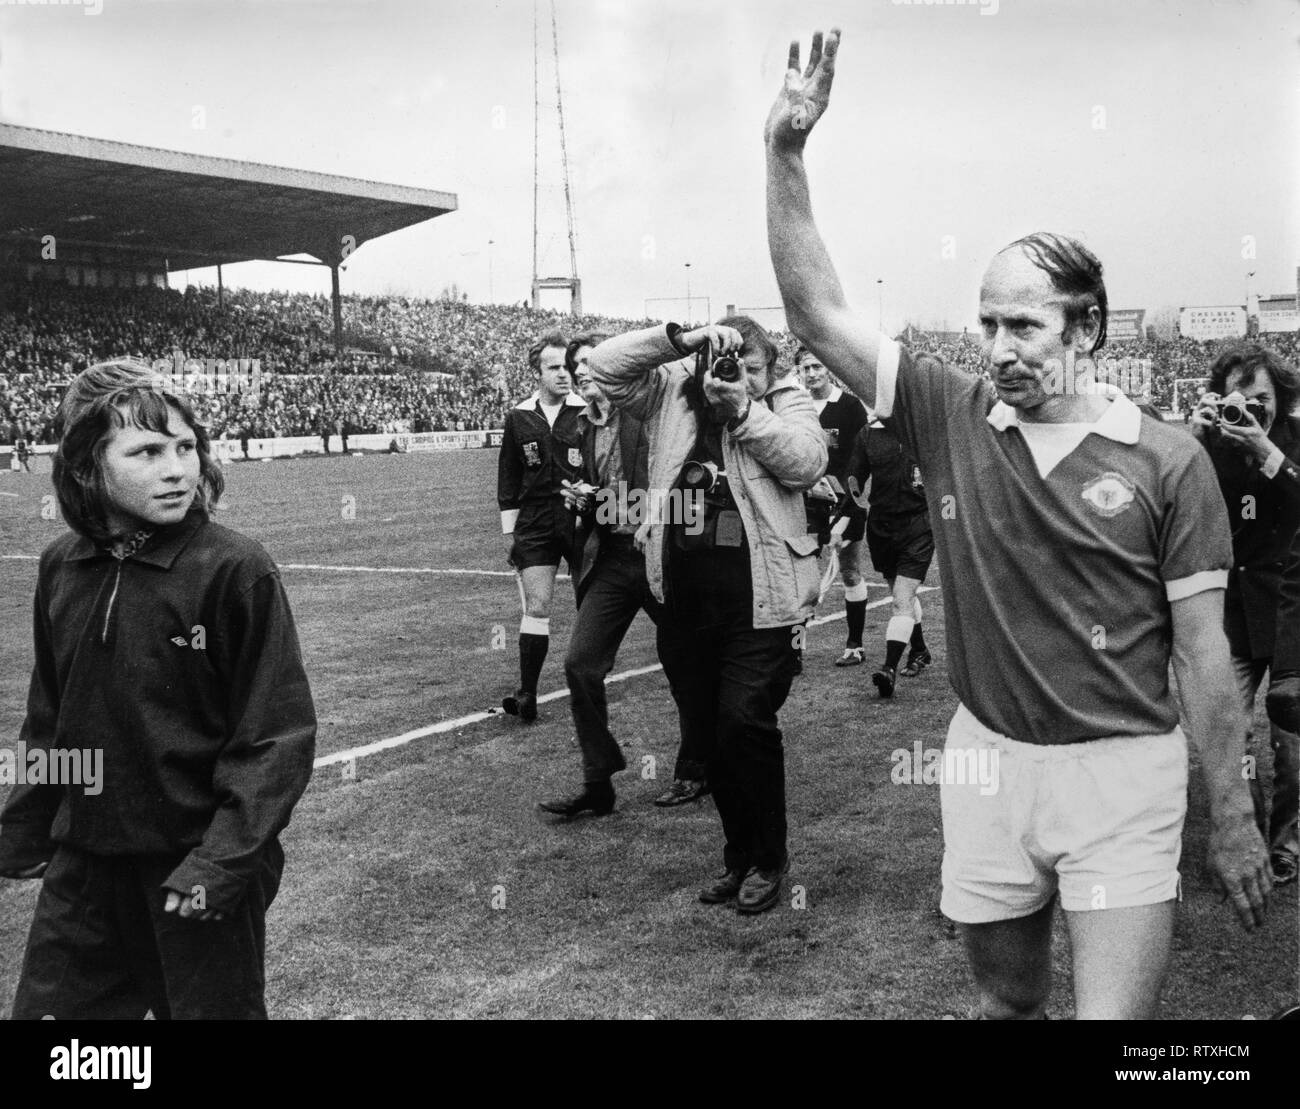 Bobby Charlton waves to the crowd at the end of his last match when his team Manchester United lost to Chelsea 1-0 at Stamford Bridge. 28 April 1973 Sir Robert Charlton, CBE (born 11 October 1937) is an English former footballer who played as a midfielder. He is regarded as one of the greatest players of all time,[6] and an essential member of the England team who won the World Cup in 1966, the year he also won the Ballon d'Or. He played almost all of his club football at Manchester United, where he became renowned for his attacking instincts and passing abilities from midfield and his ferocio Stock Photo